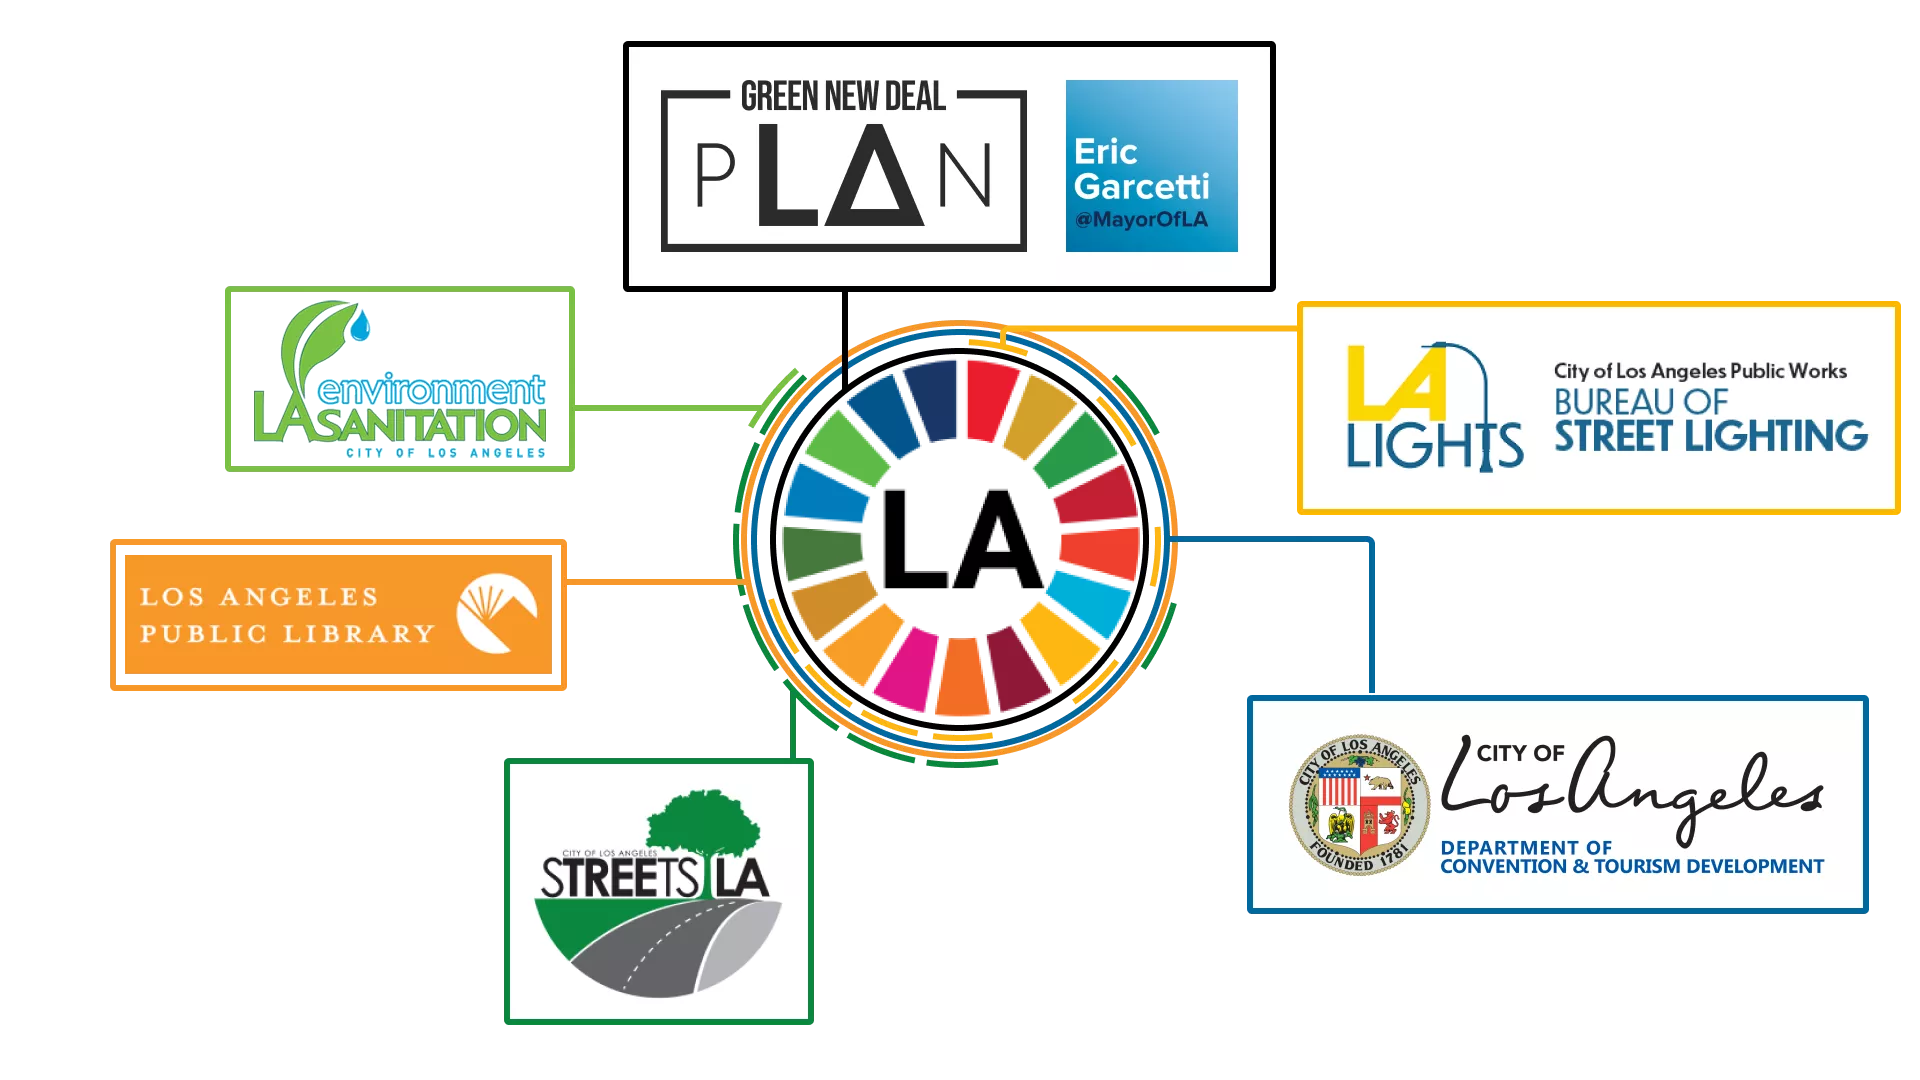 image shows SDG wheel surrounded by the logos of the Green New Deal, Bureau of Street Lighting, Los Angeles Department of Tourism, StreetsLA, Los Angeles Public Library, and Los Angeles Bureau of Sanitation and Environment